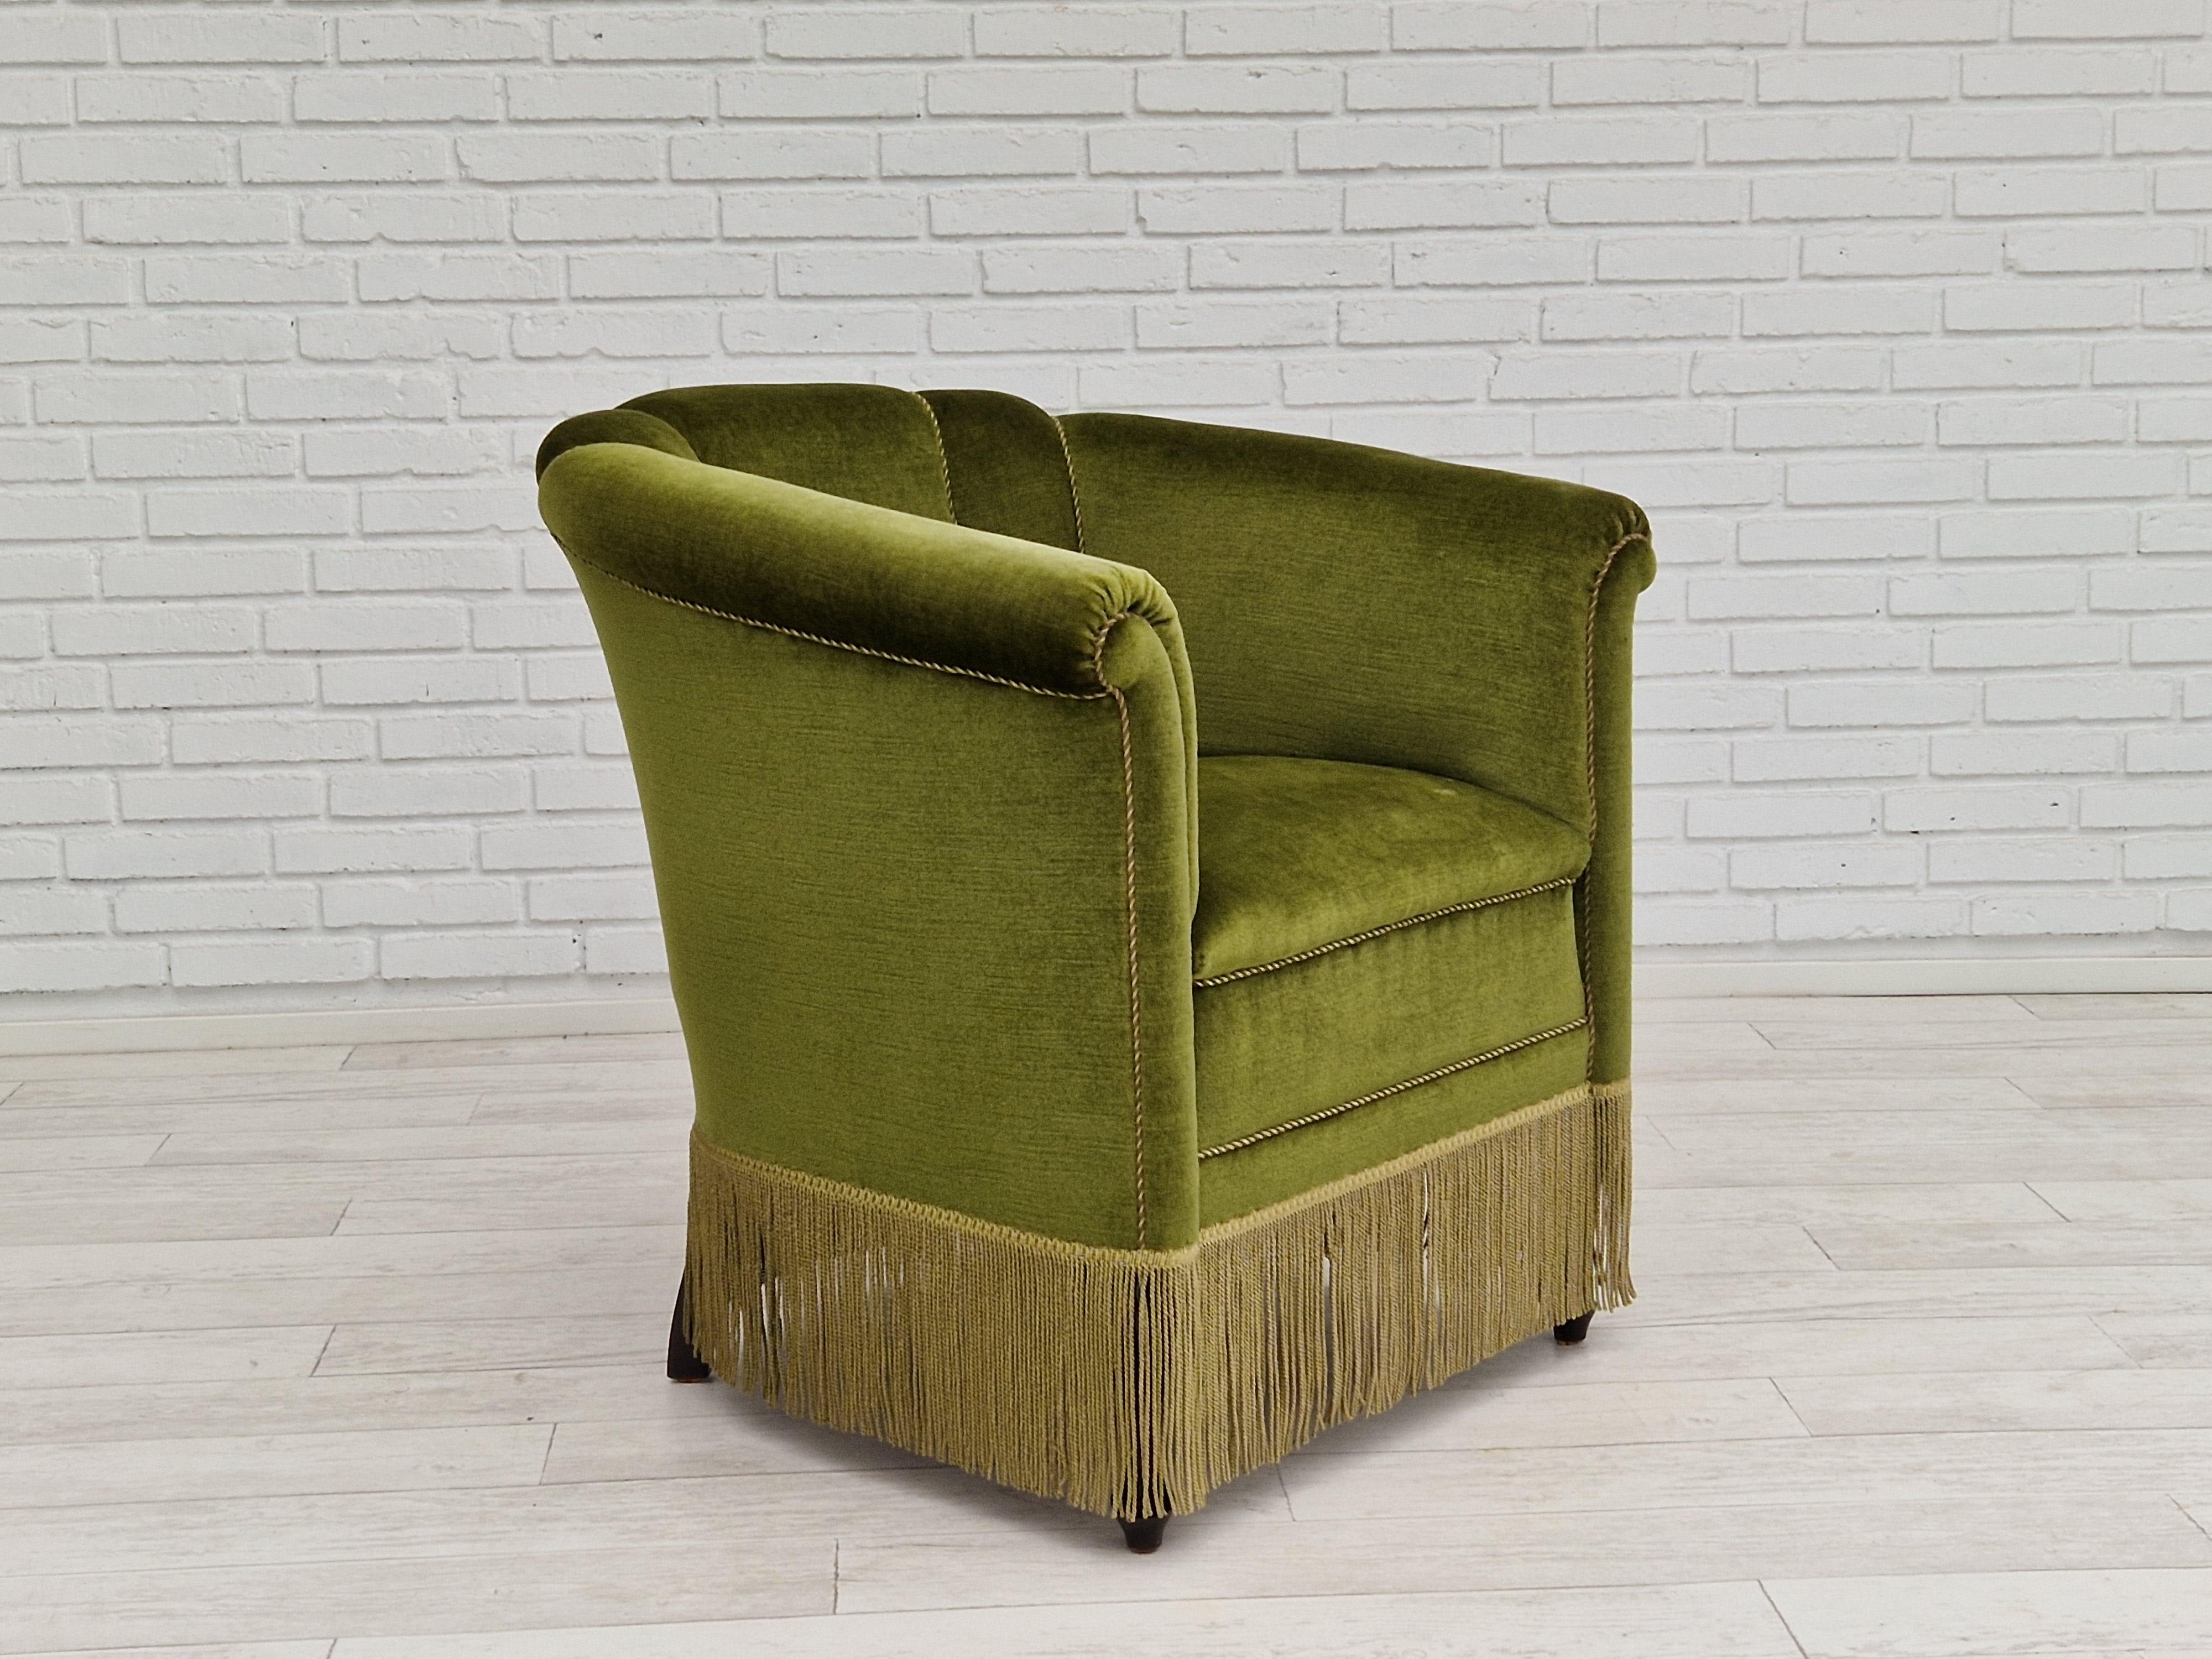 1960s, Danish Velour Chair, Original Condition, Beechwood In Good Condition For Sale In Tarm, 82